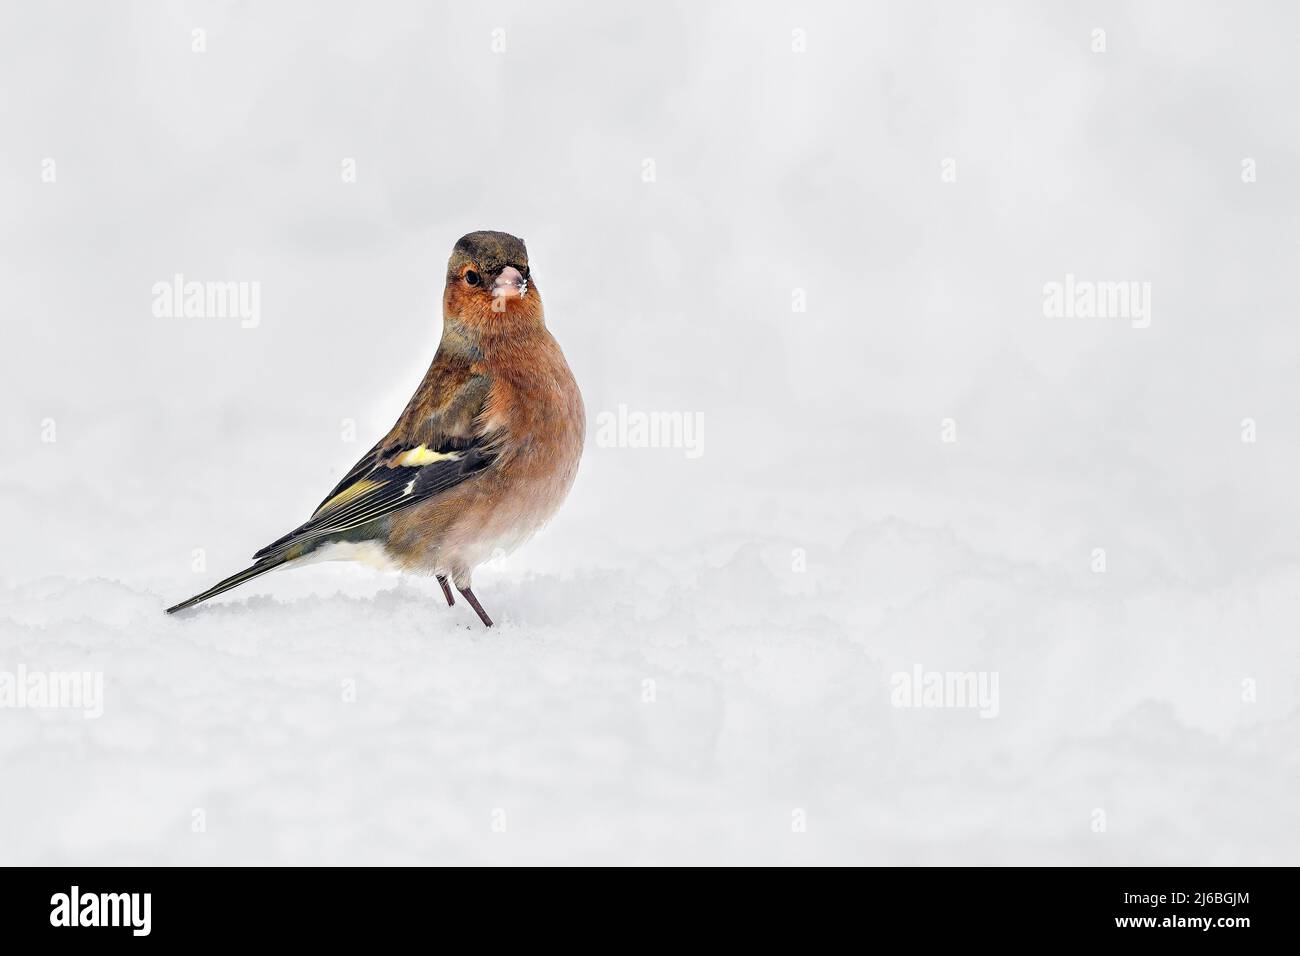 Common chaffinch on snow Stock Photo